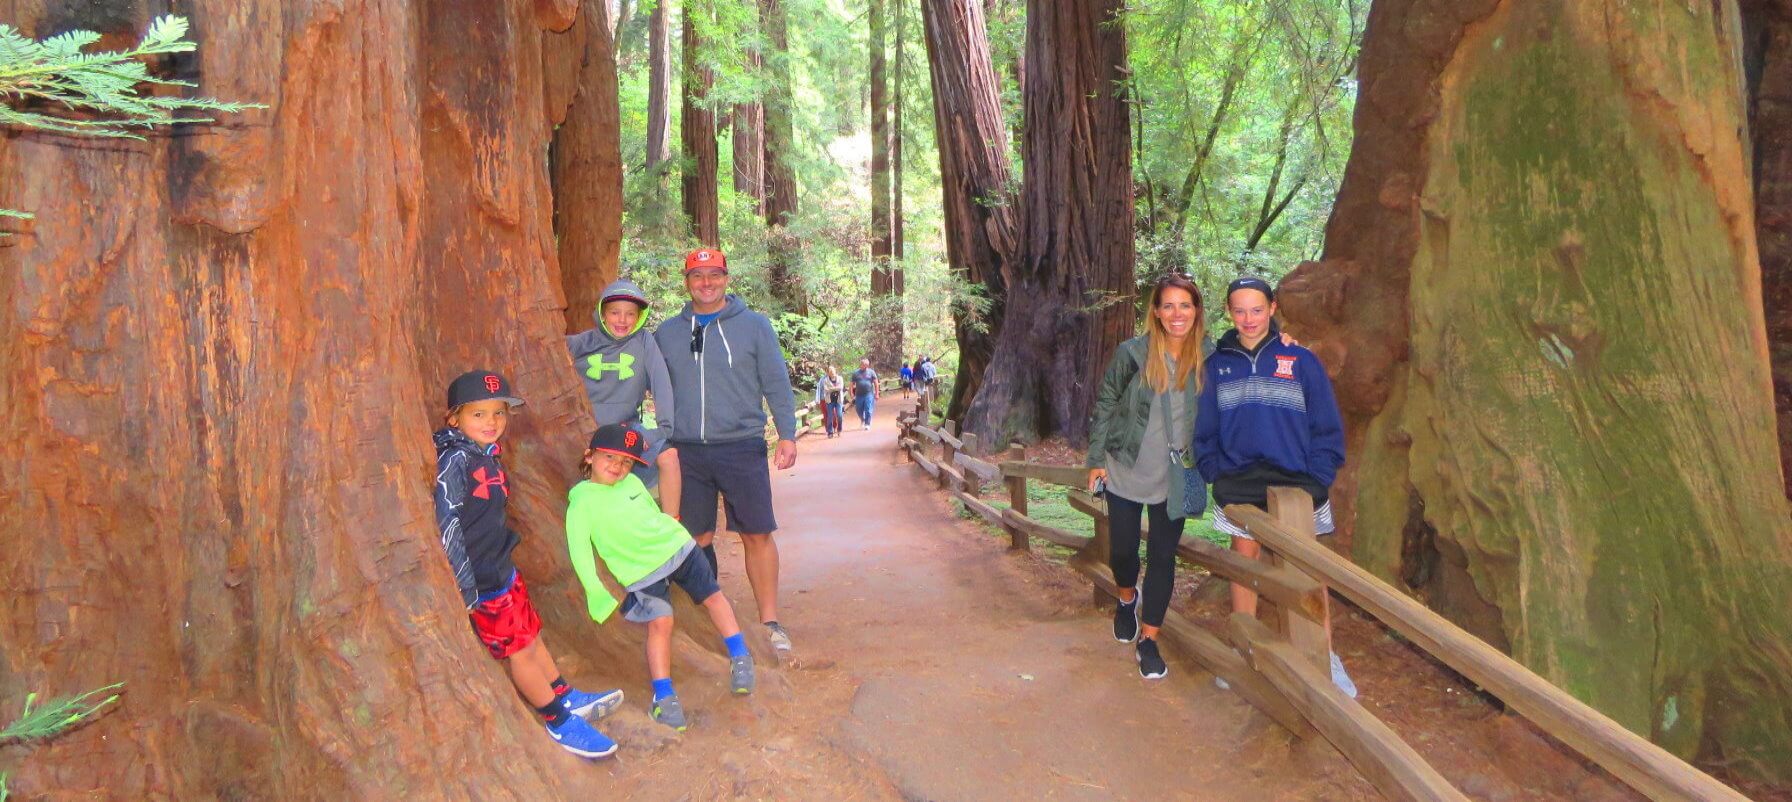 muir-woods-forest-of-redwoods-tour-family-with-kids-from-san-francisco